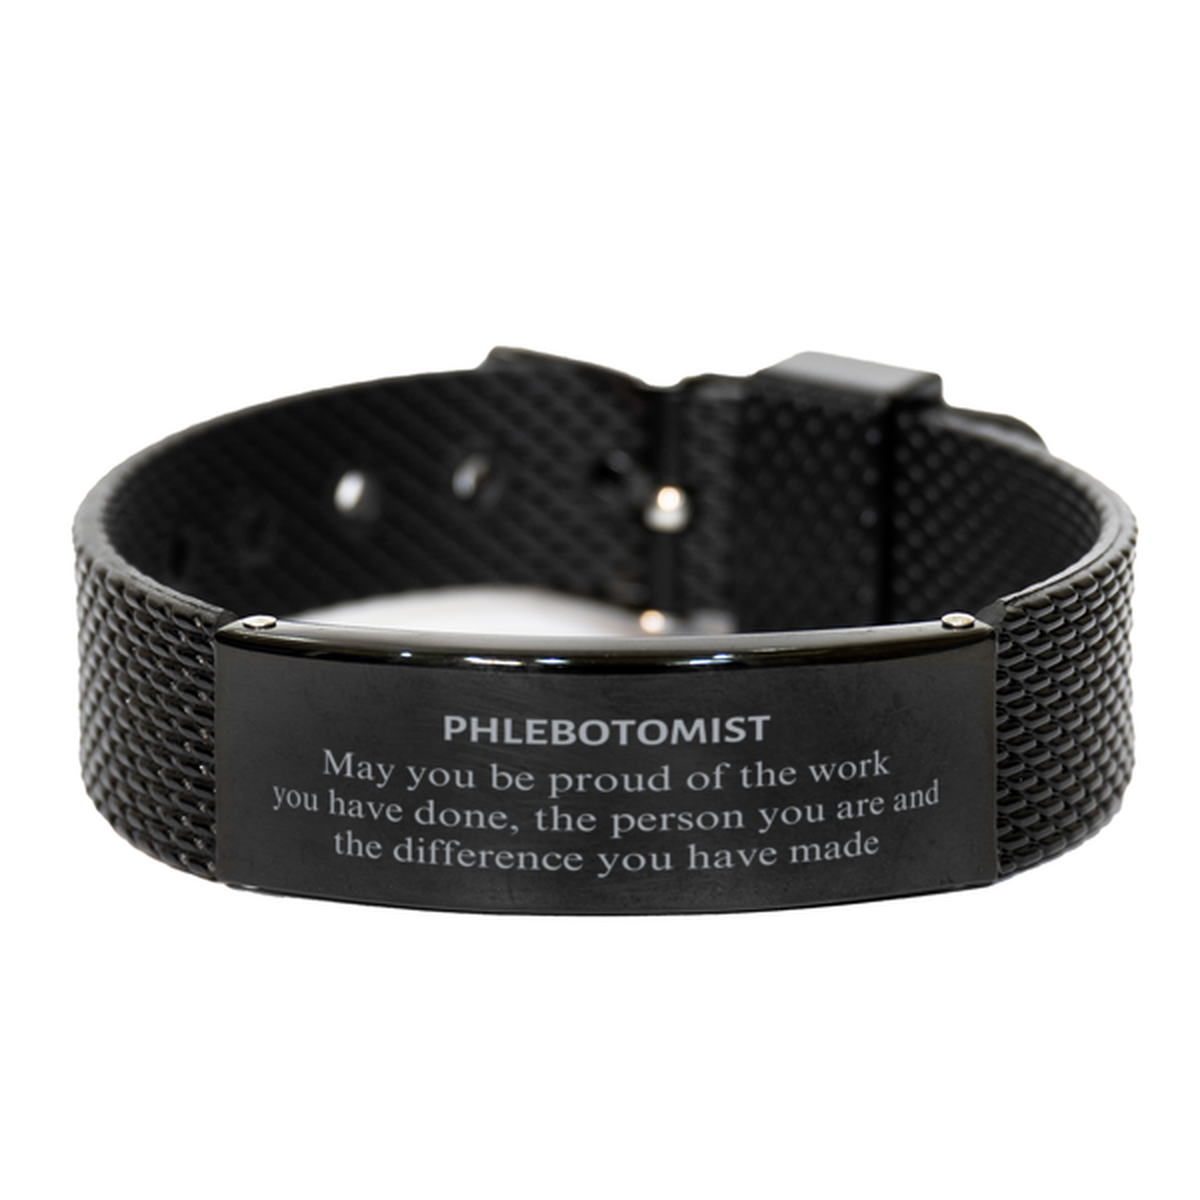 Phlebotomist May you be proud of the work you have done, Retirement Phlebotomist Black Shark Mesh Bracelet for Colleague Appreciation Gifts Amazing for Phlebotomist